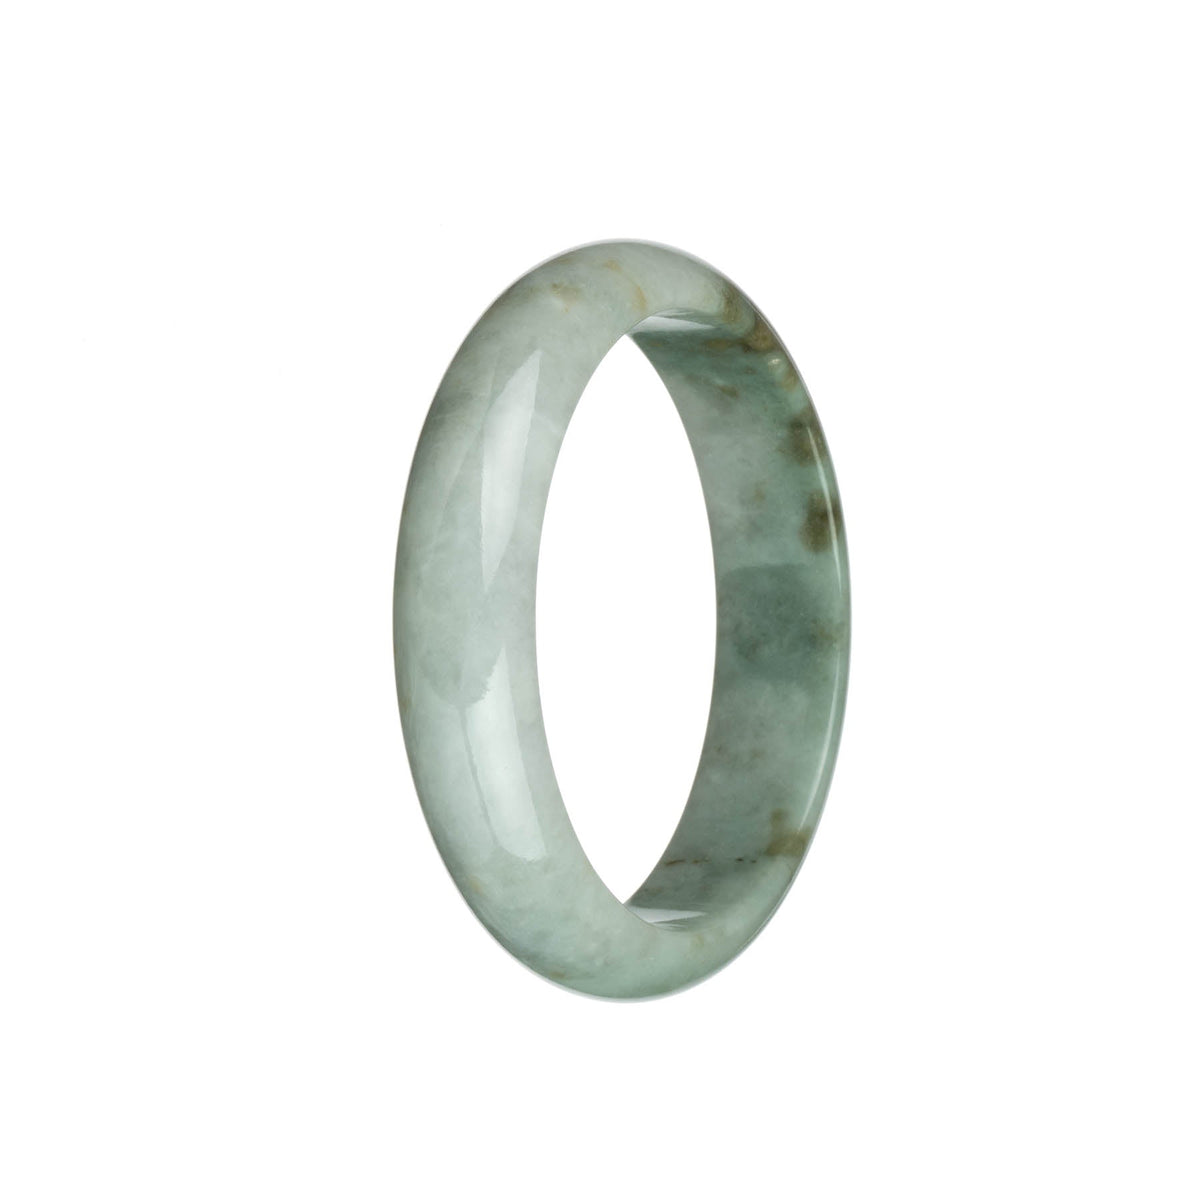 A half moon shaped jadeite jade bangle with natural light grey and light green hues, adorned with intricate brown patterns.